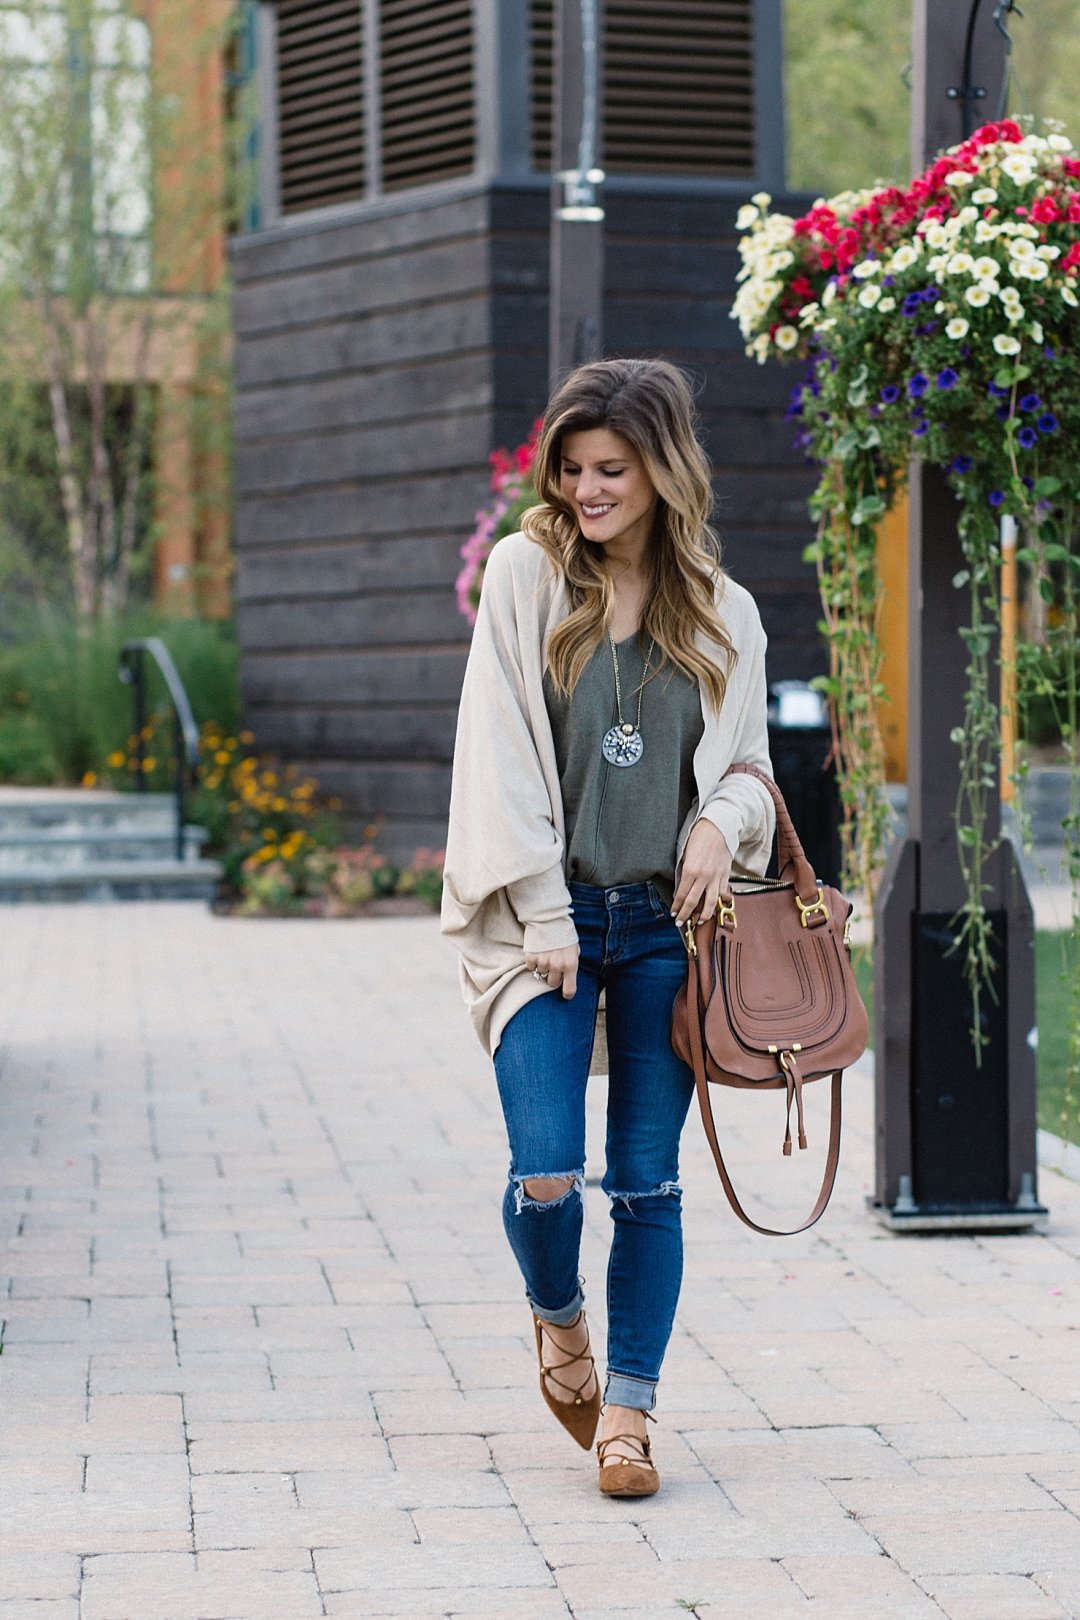 Fall Style Inspiration: Olive Jeans and Cozy Layers